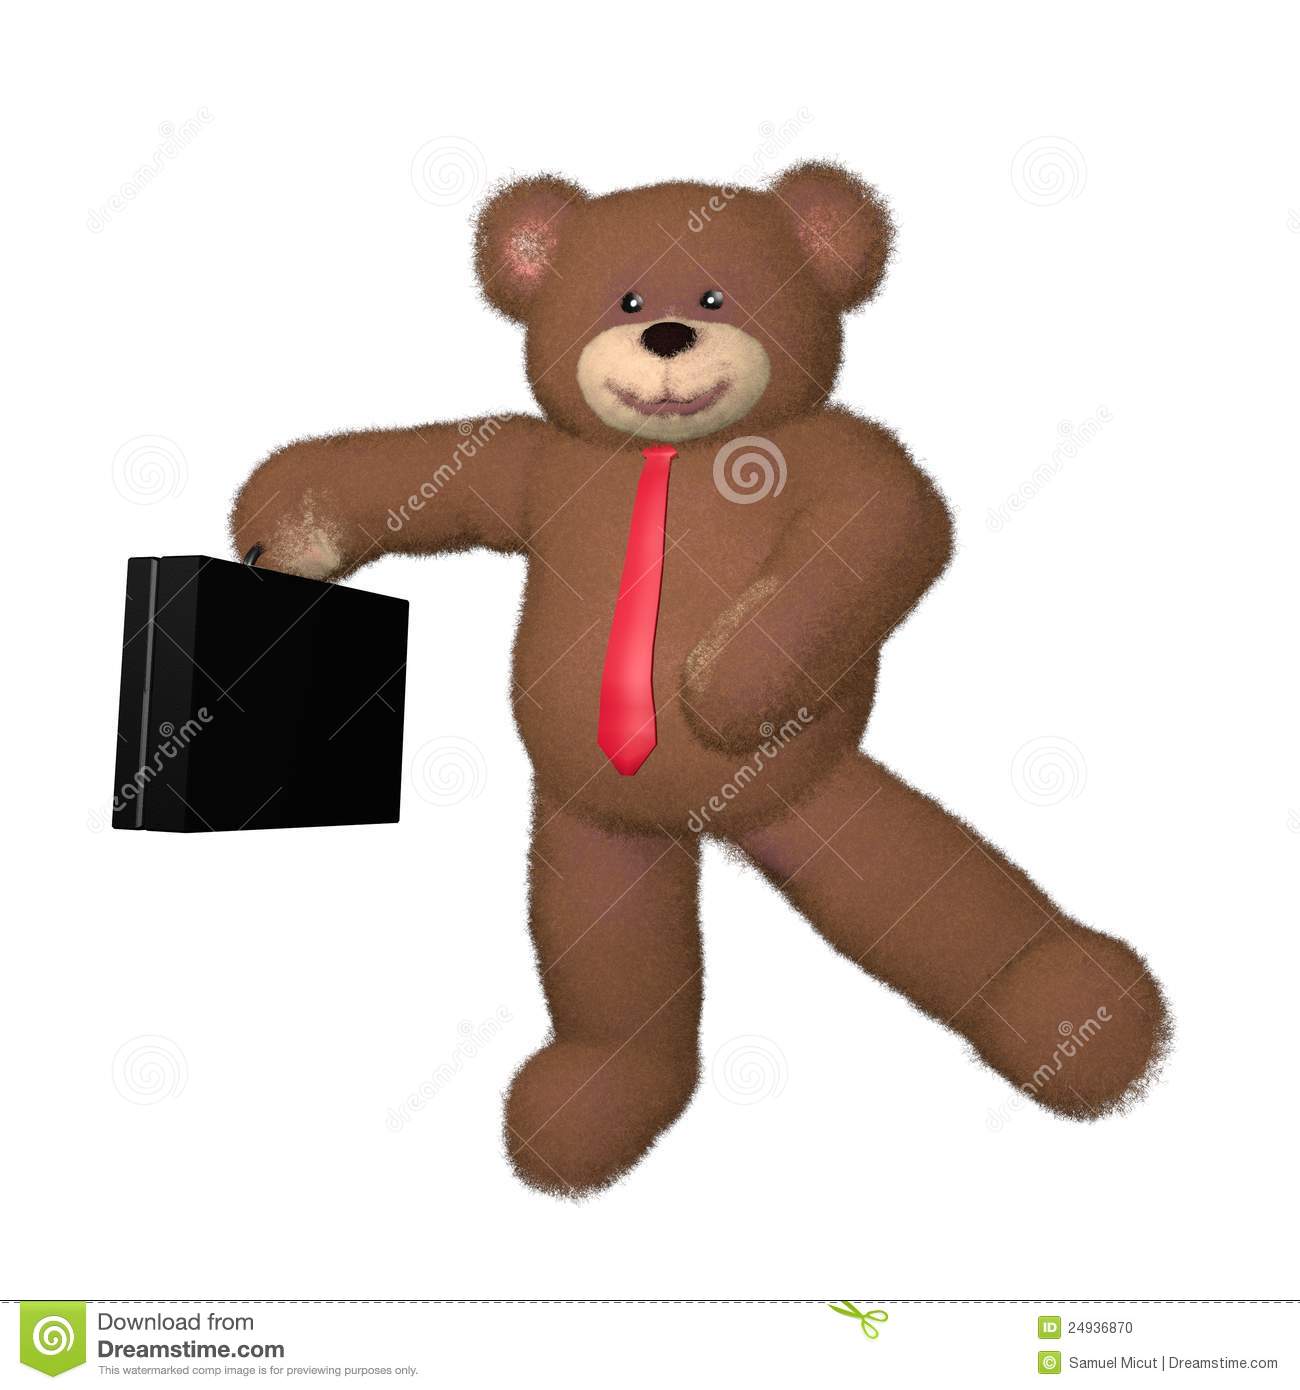 Cute Teddy Bear Businessman Dancing Happily Holding Briefcase 